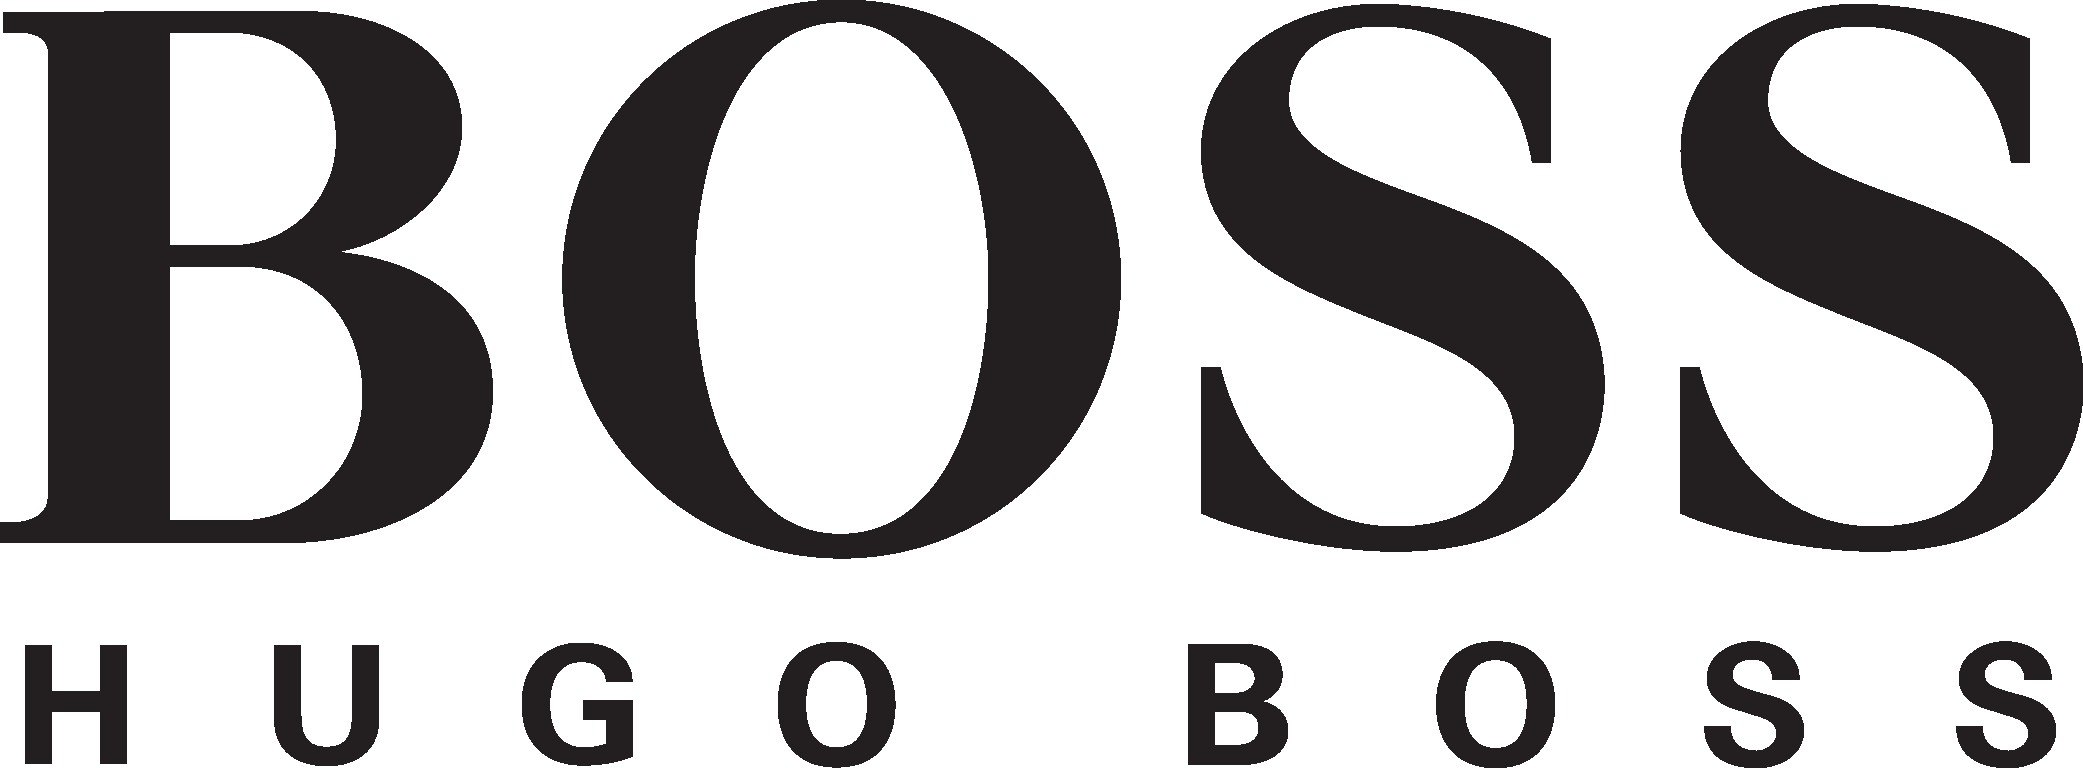 Boss Hugo Boss Logo Vector Clipart - Large Size Png Image - PikPng